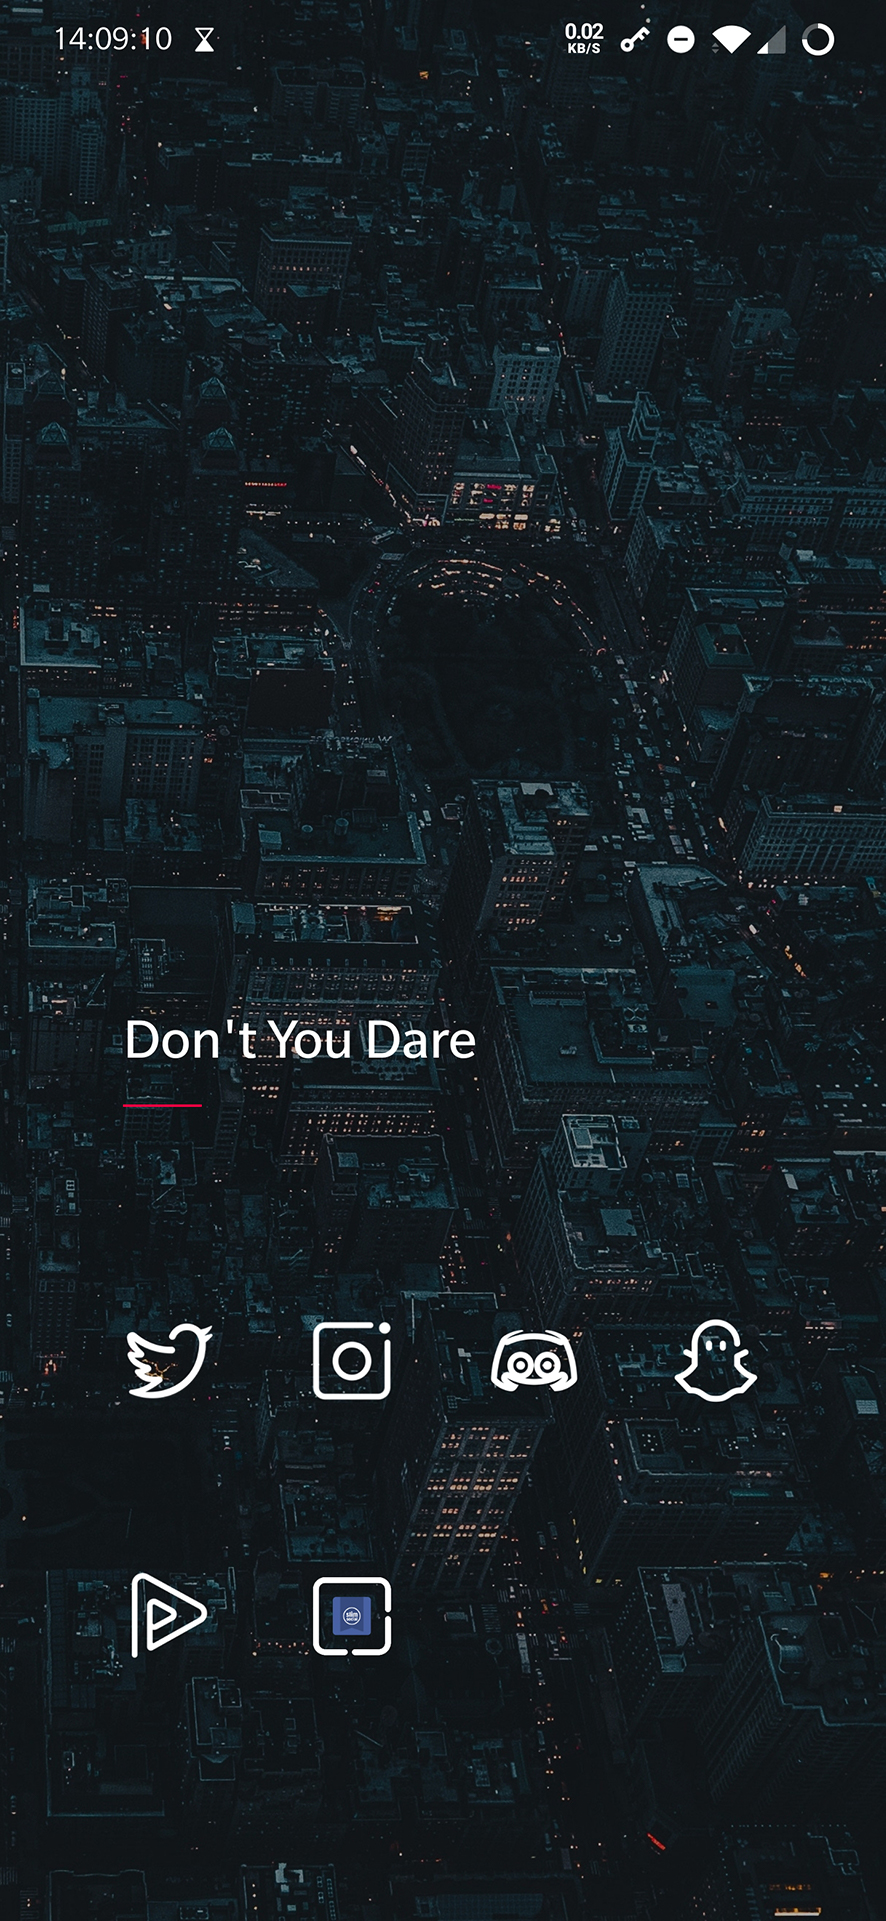 Folder named 'Don't you Dare' with Social Media apps